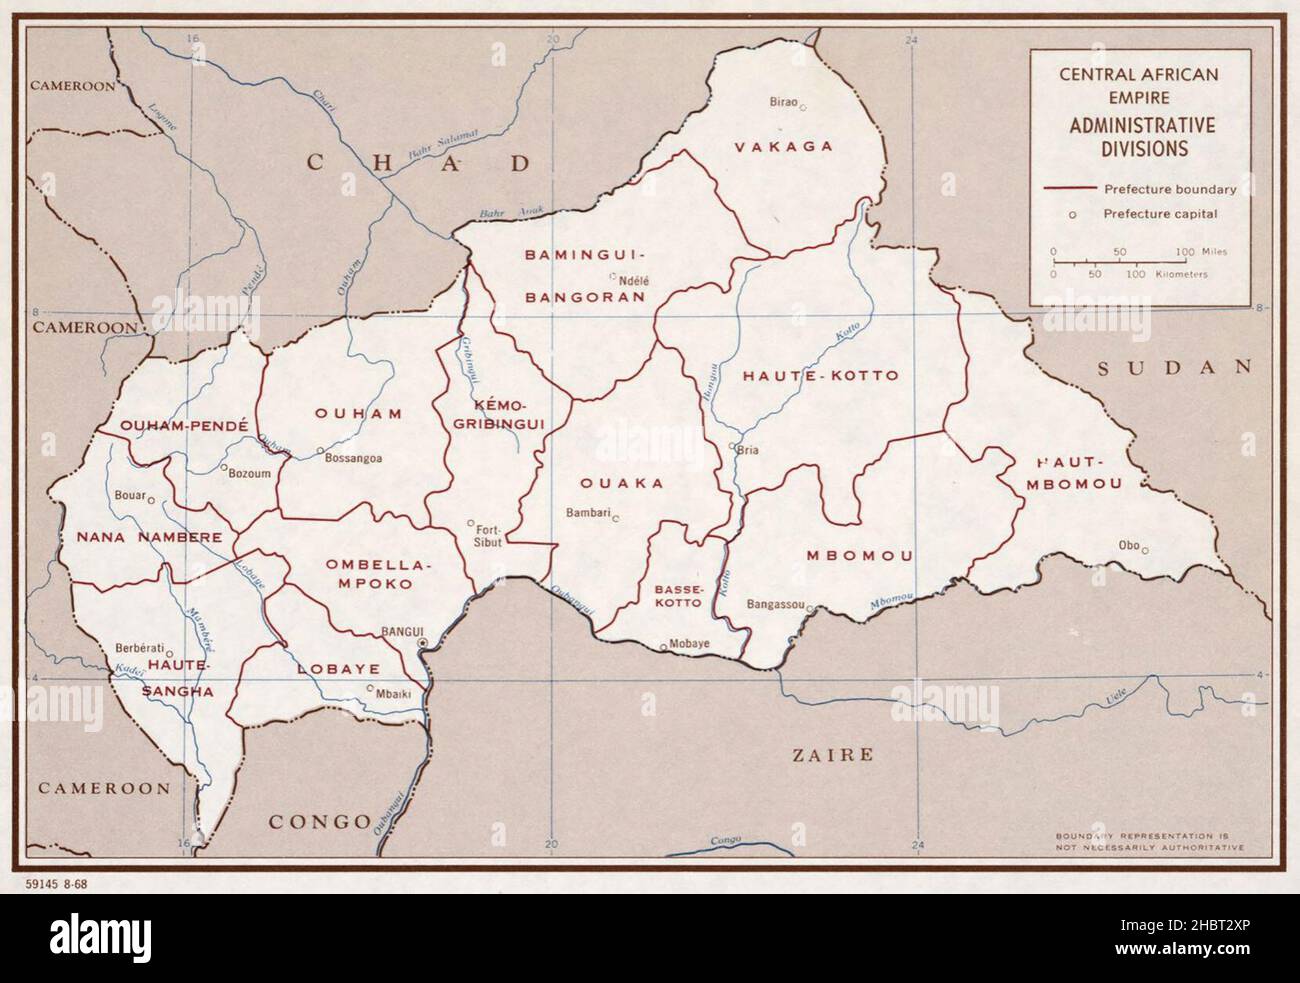 1968 central african empire map hi-res stock photography and images - Alamy